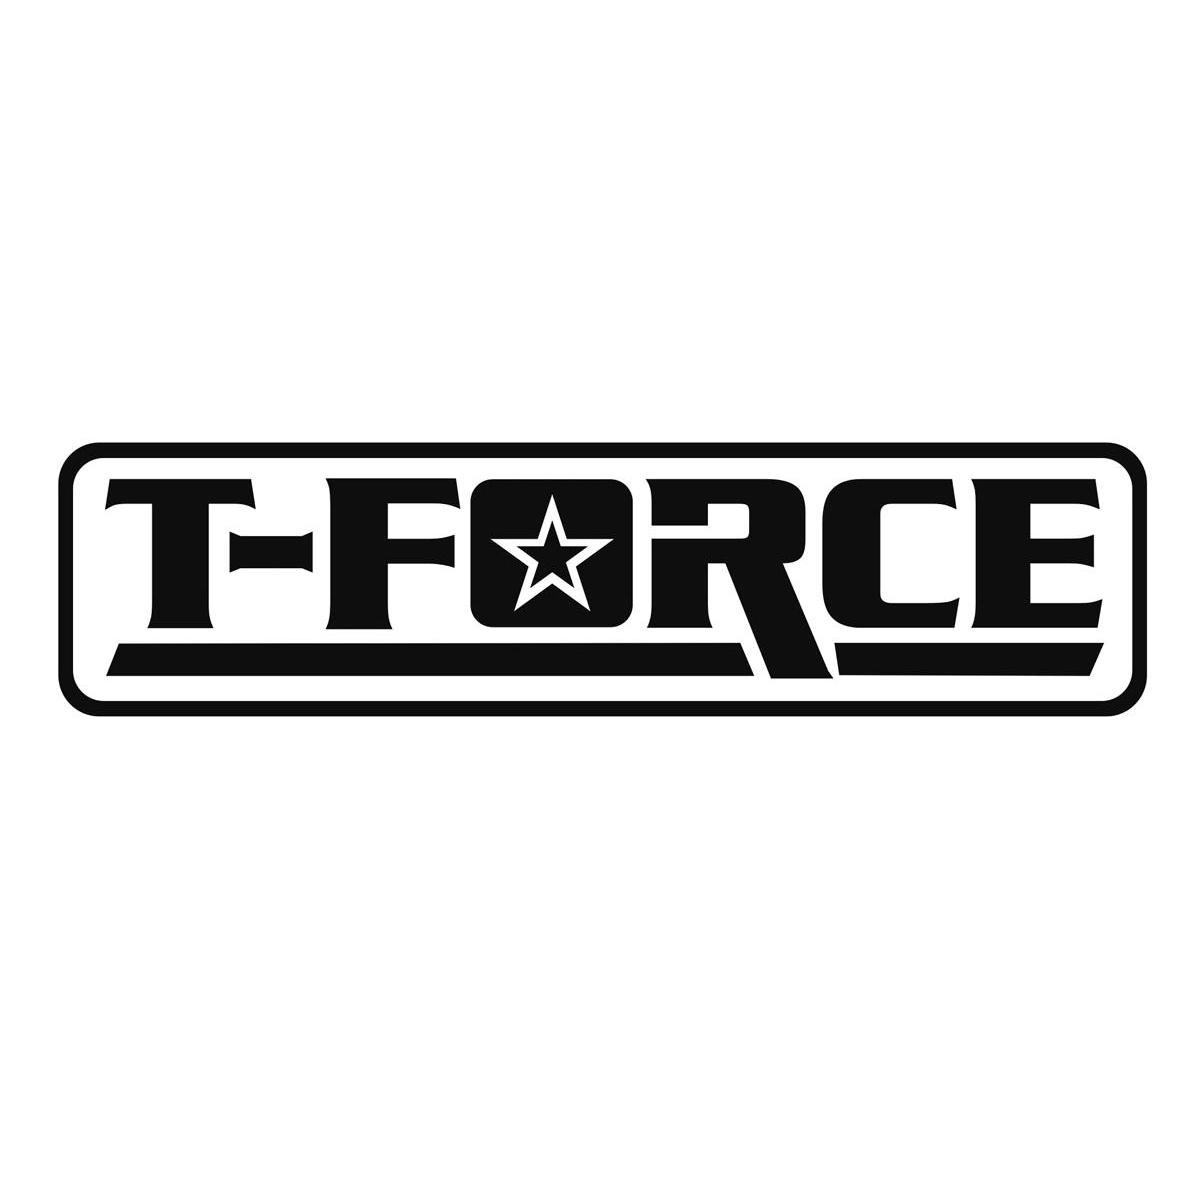 t-force